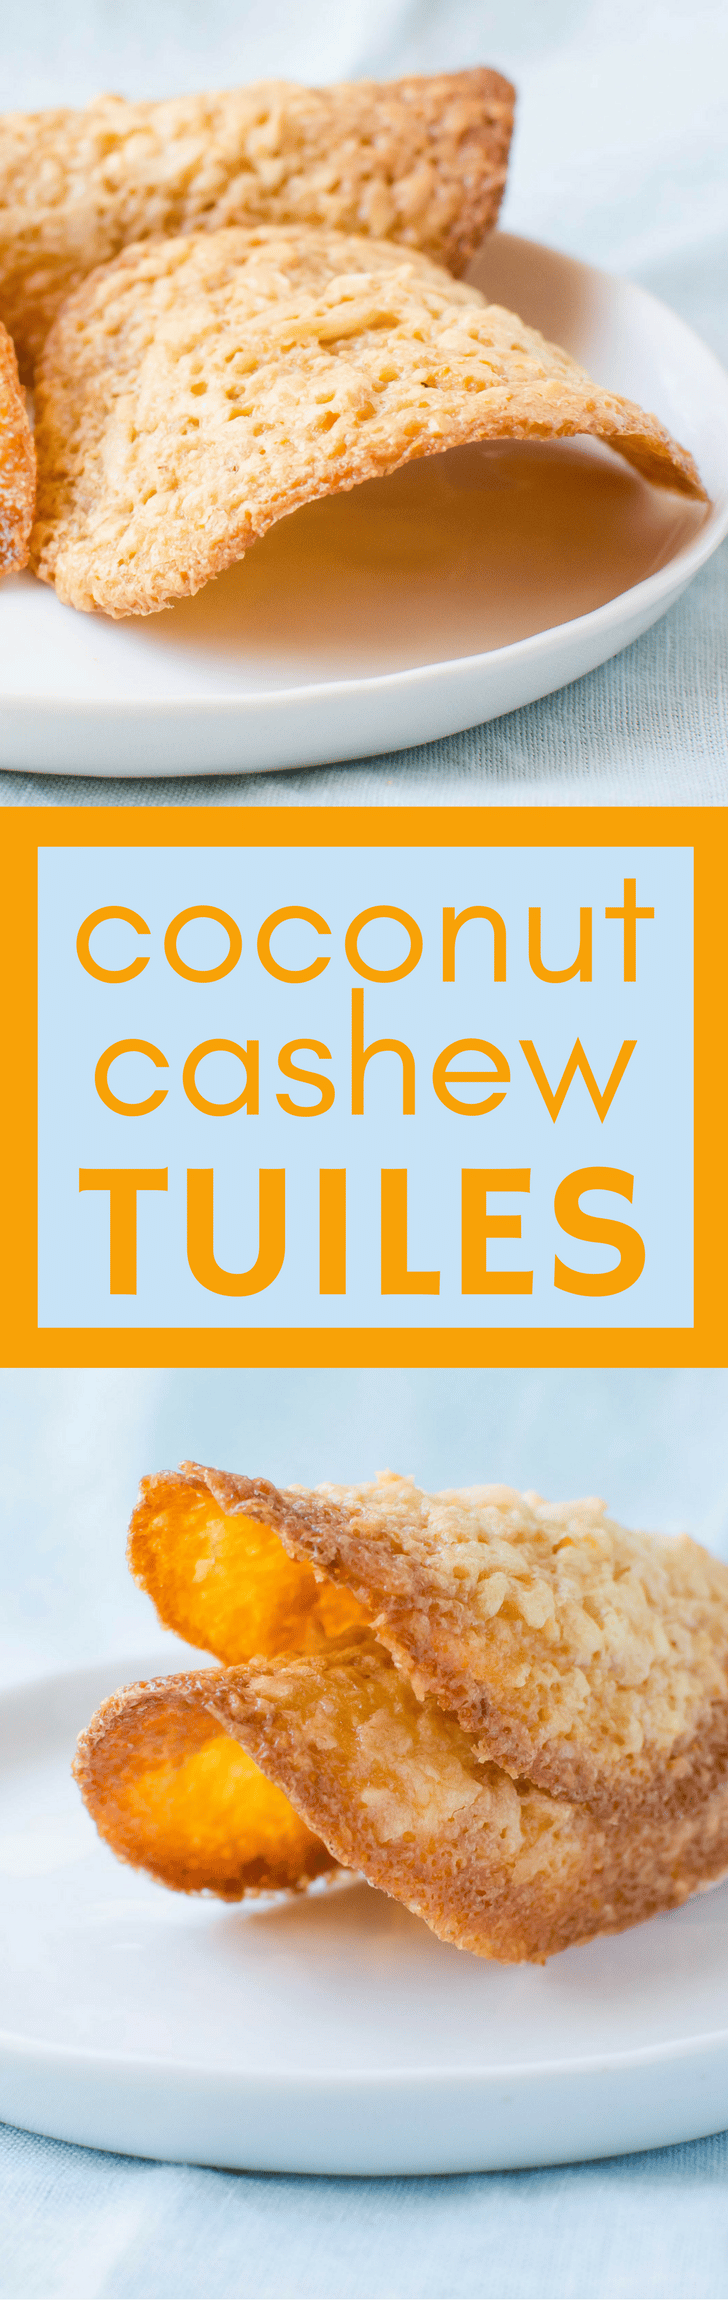 If you love tuile cookies, you'll love these Coconut Cashew Tuiles. This easy tuile cookie recipe shows you how to make tuiles with this everyday kitchen tool. #tuile #tuilecookies #cashew #coconut #coconutcookies #cashewcookies #cookies #tuilerecipe #coconutcookierecipe #cashewcookierecipe #rollingpin #shapedcookies